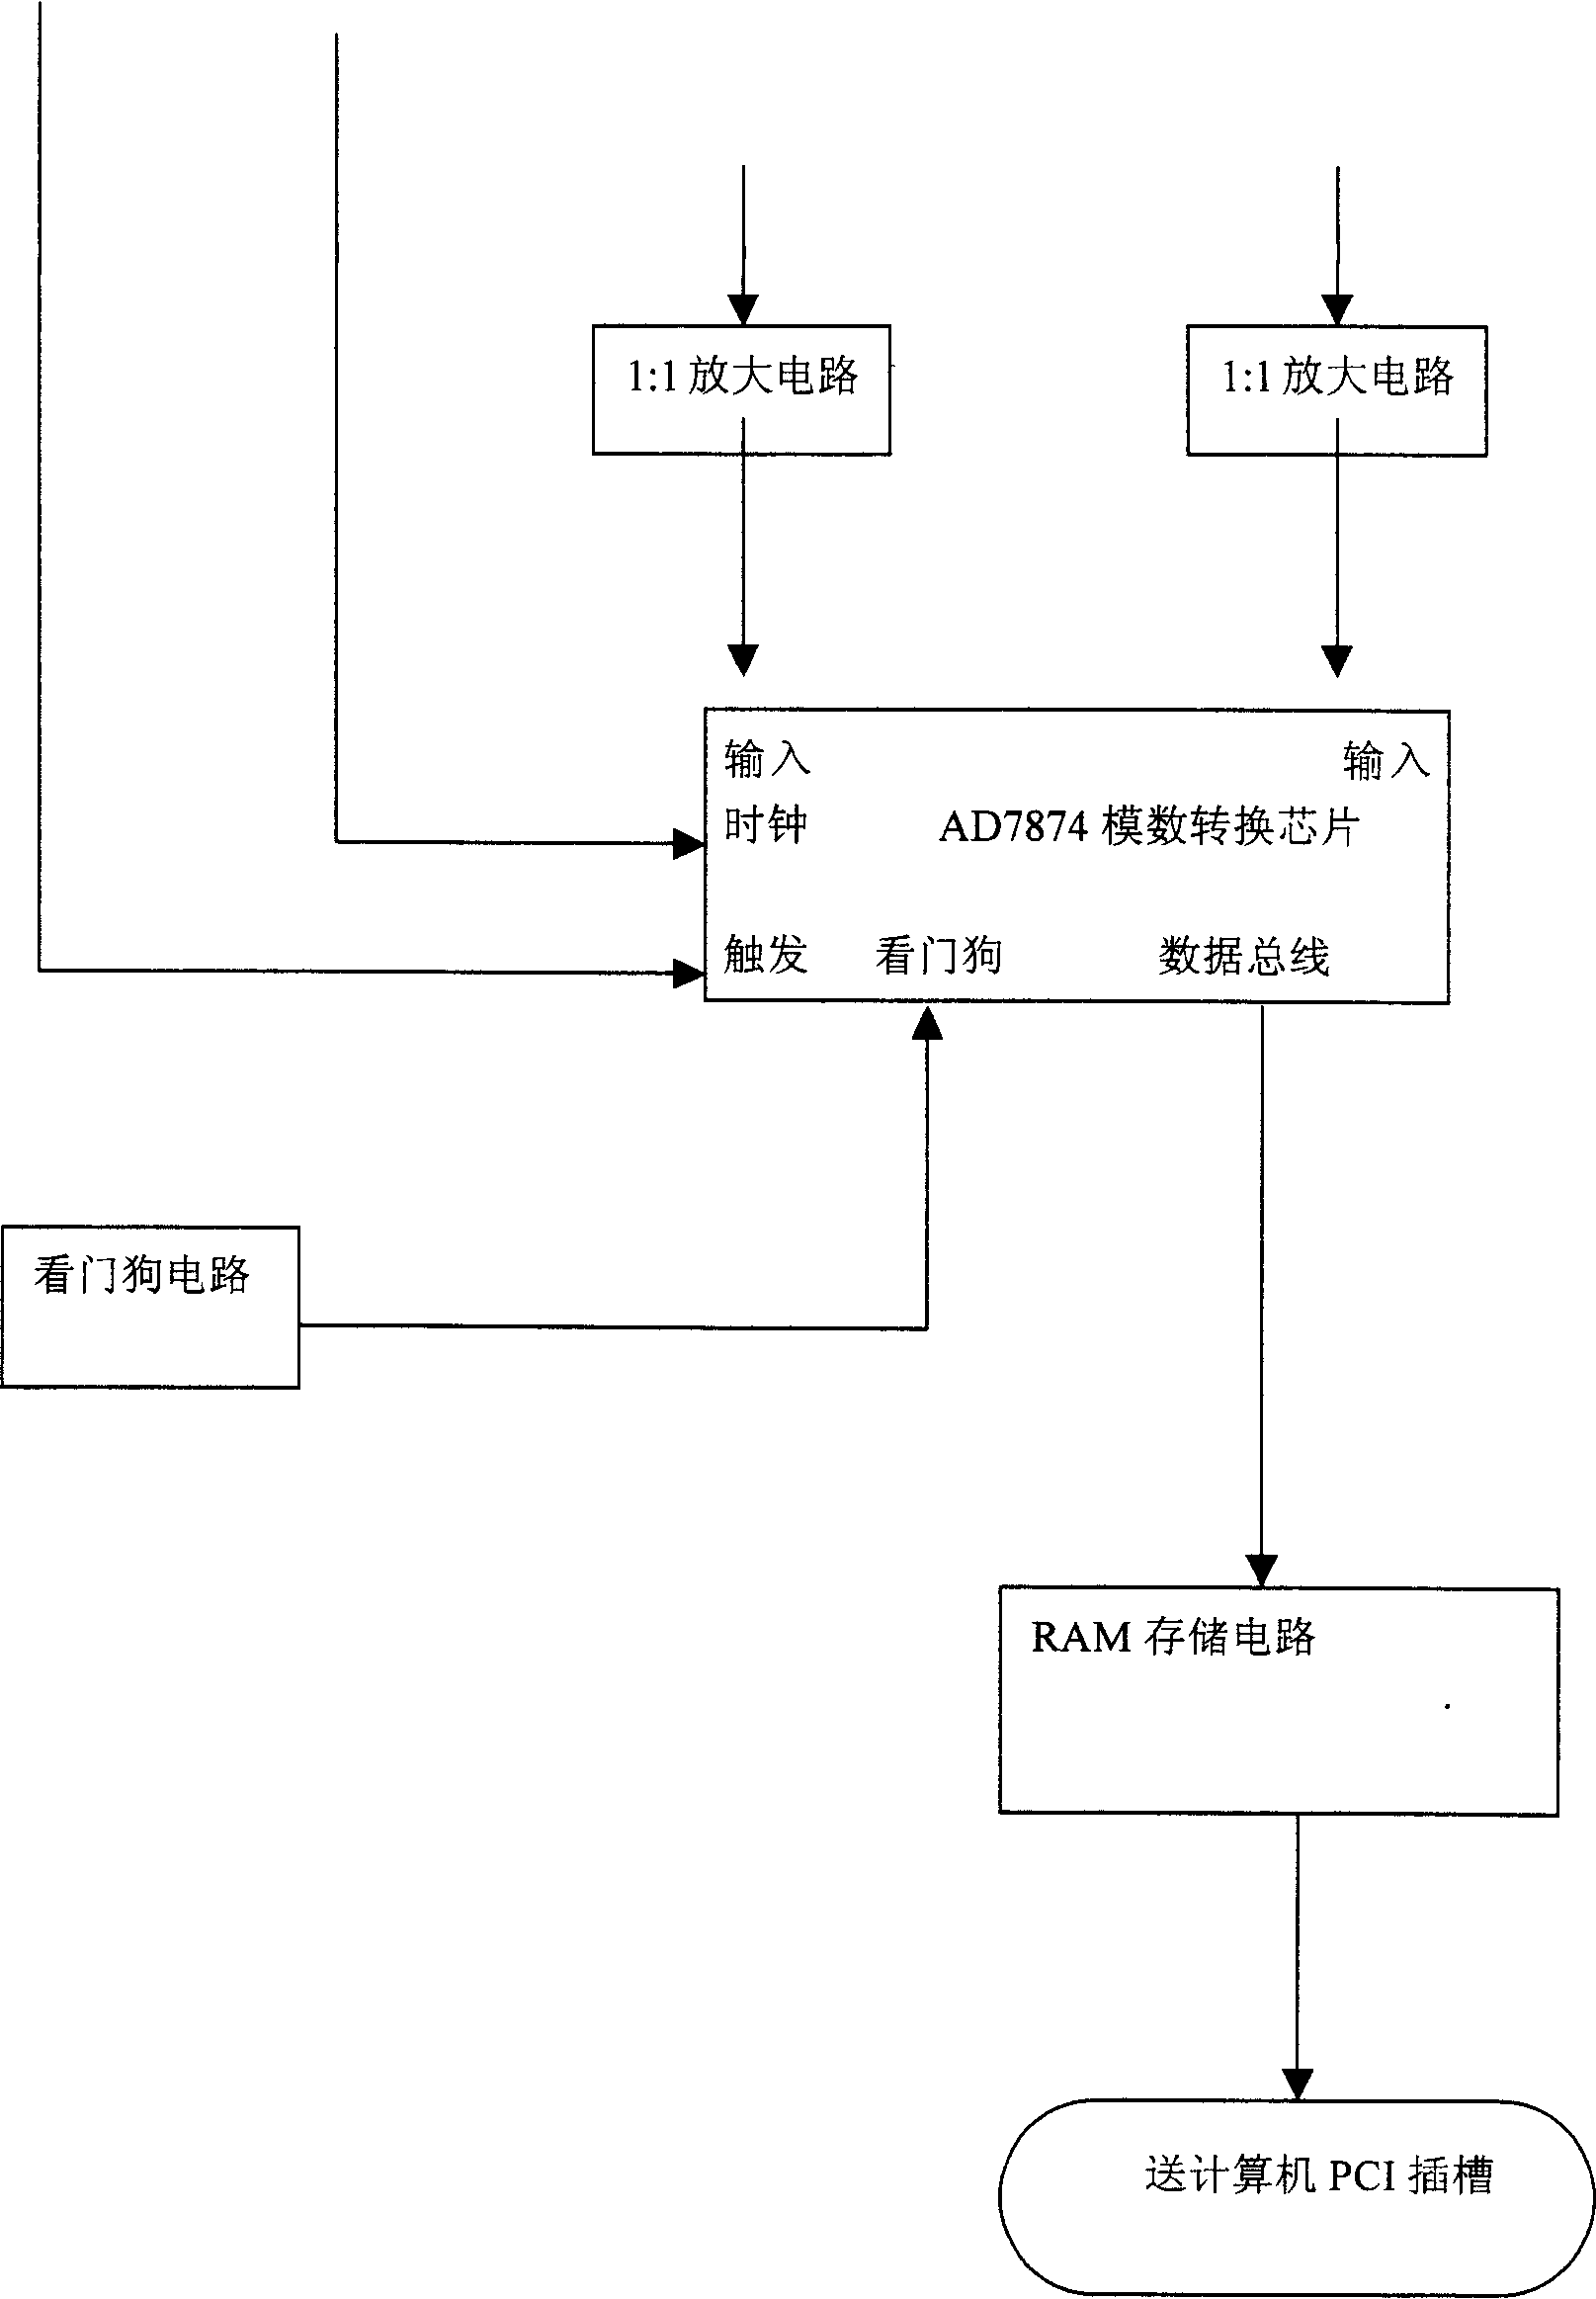 Cycle sampling method in quality of power supply in electrical network